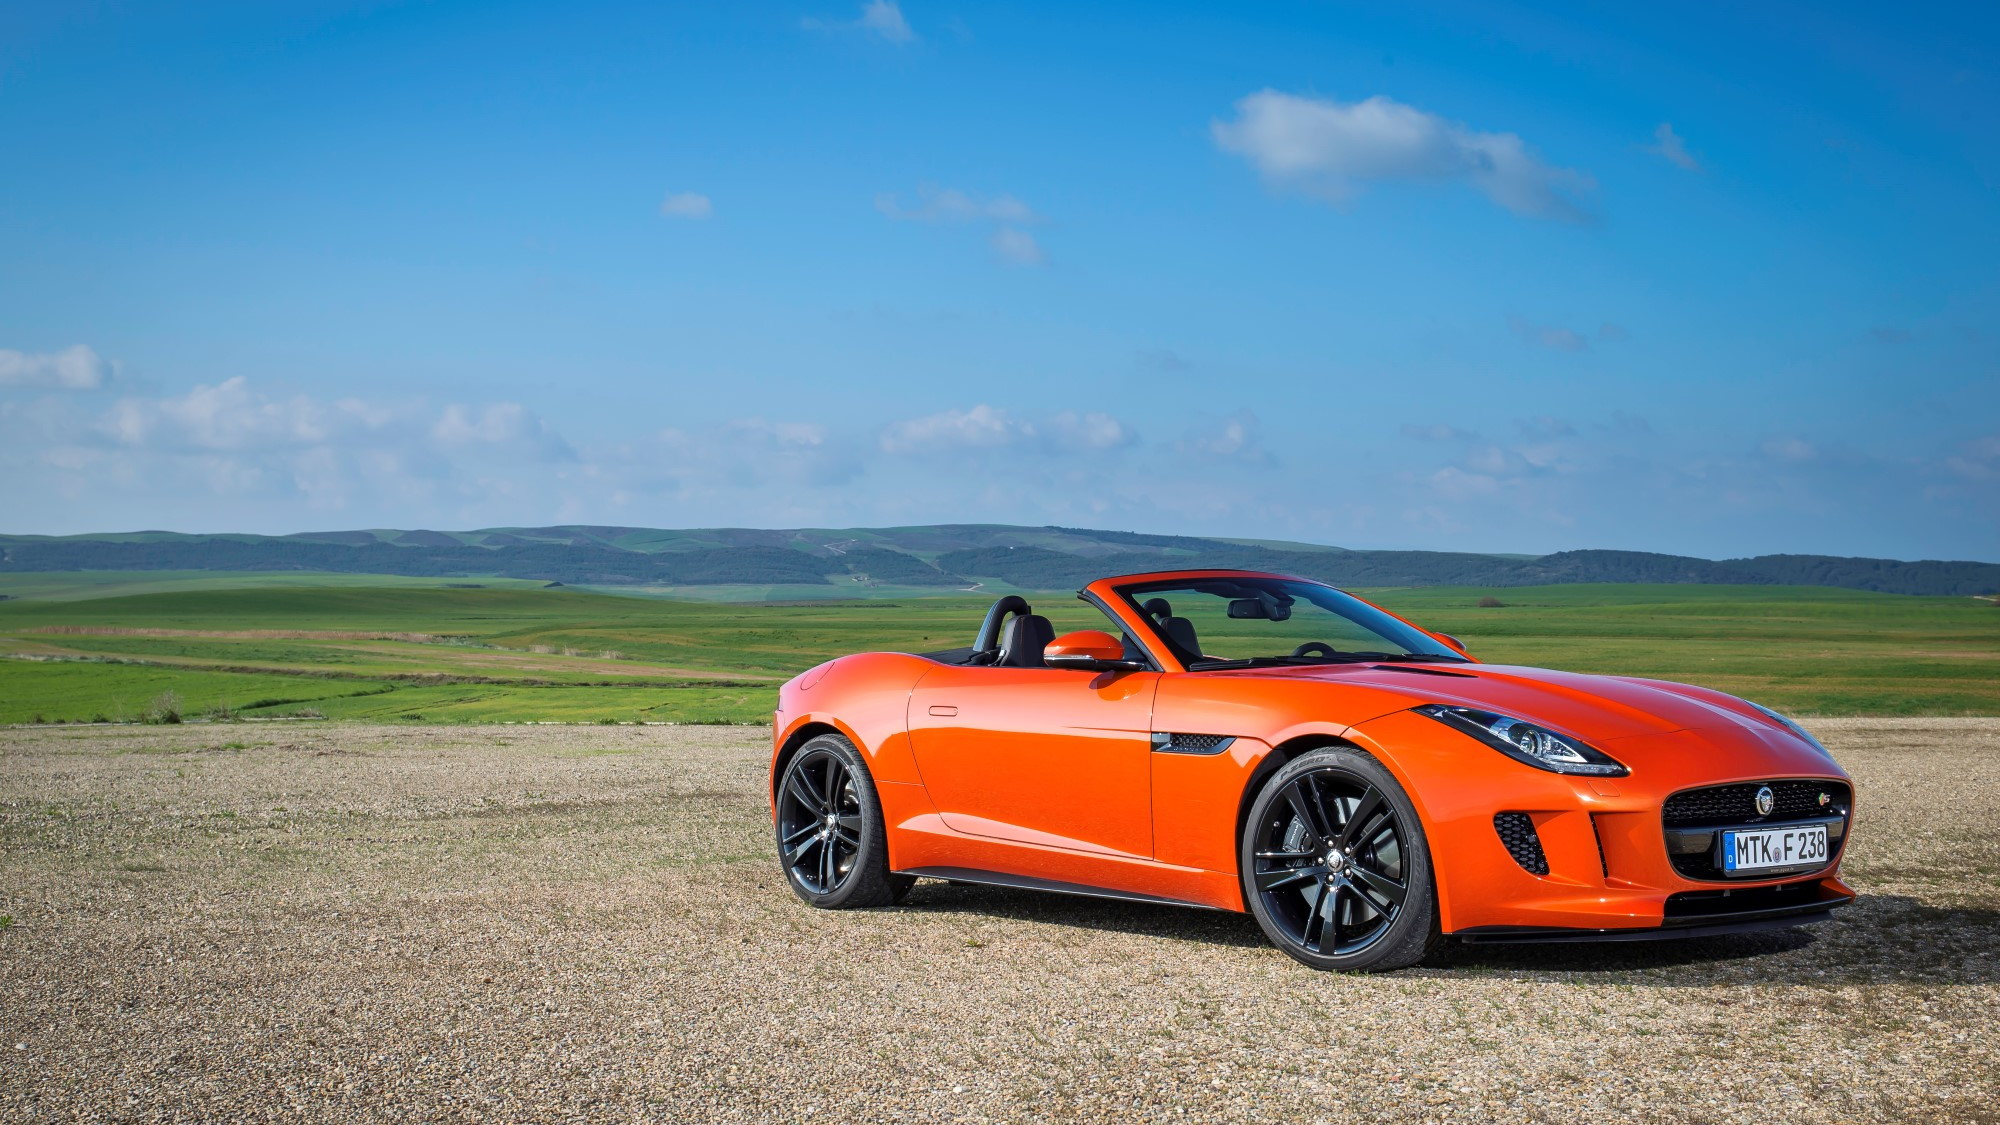 2014 Jaguar F-Type Detailed Review: 30 Days Of F-Type